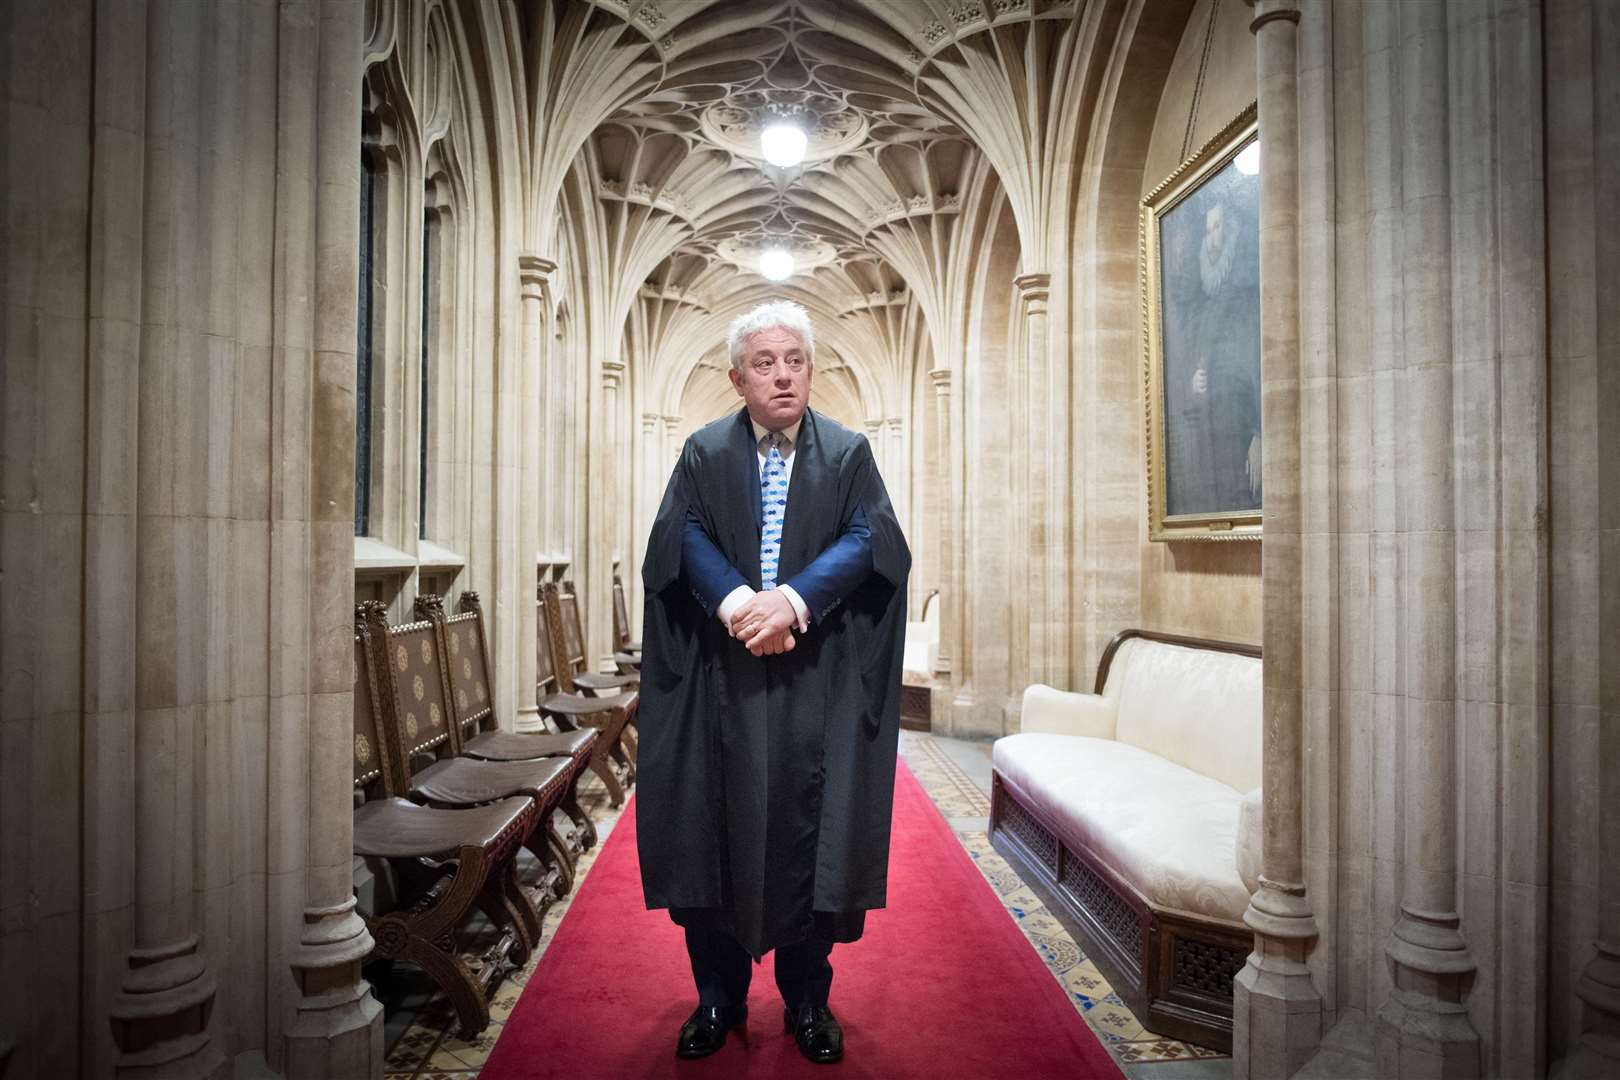 John Bercow during his days as speaker of the House of Commons (Stefan Rousseau/PA)